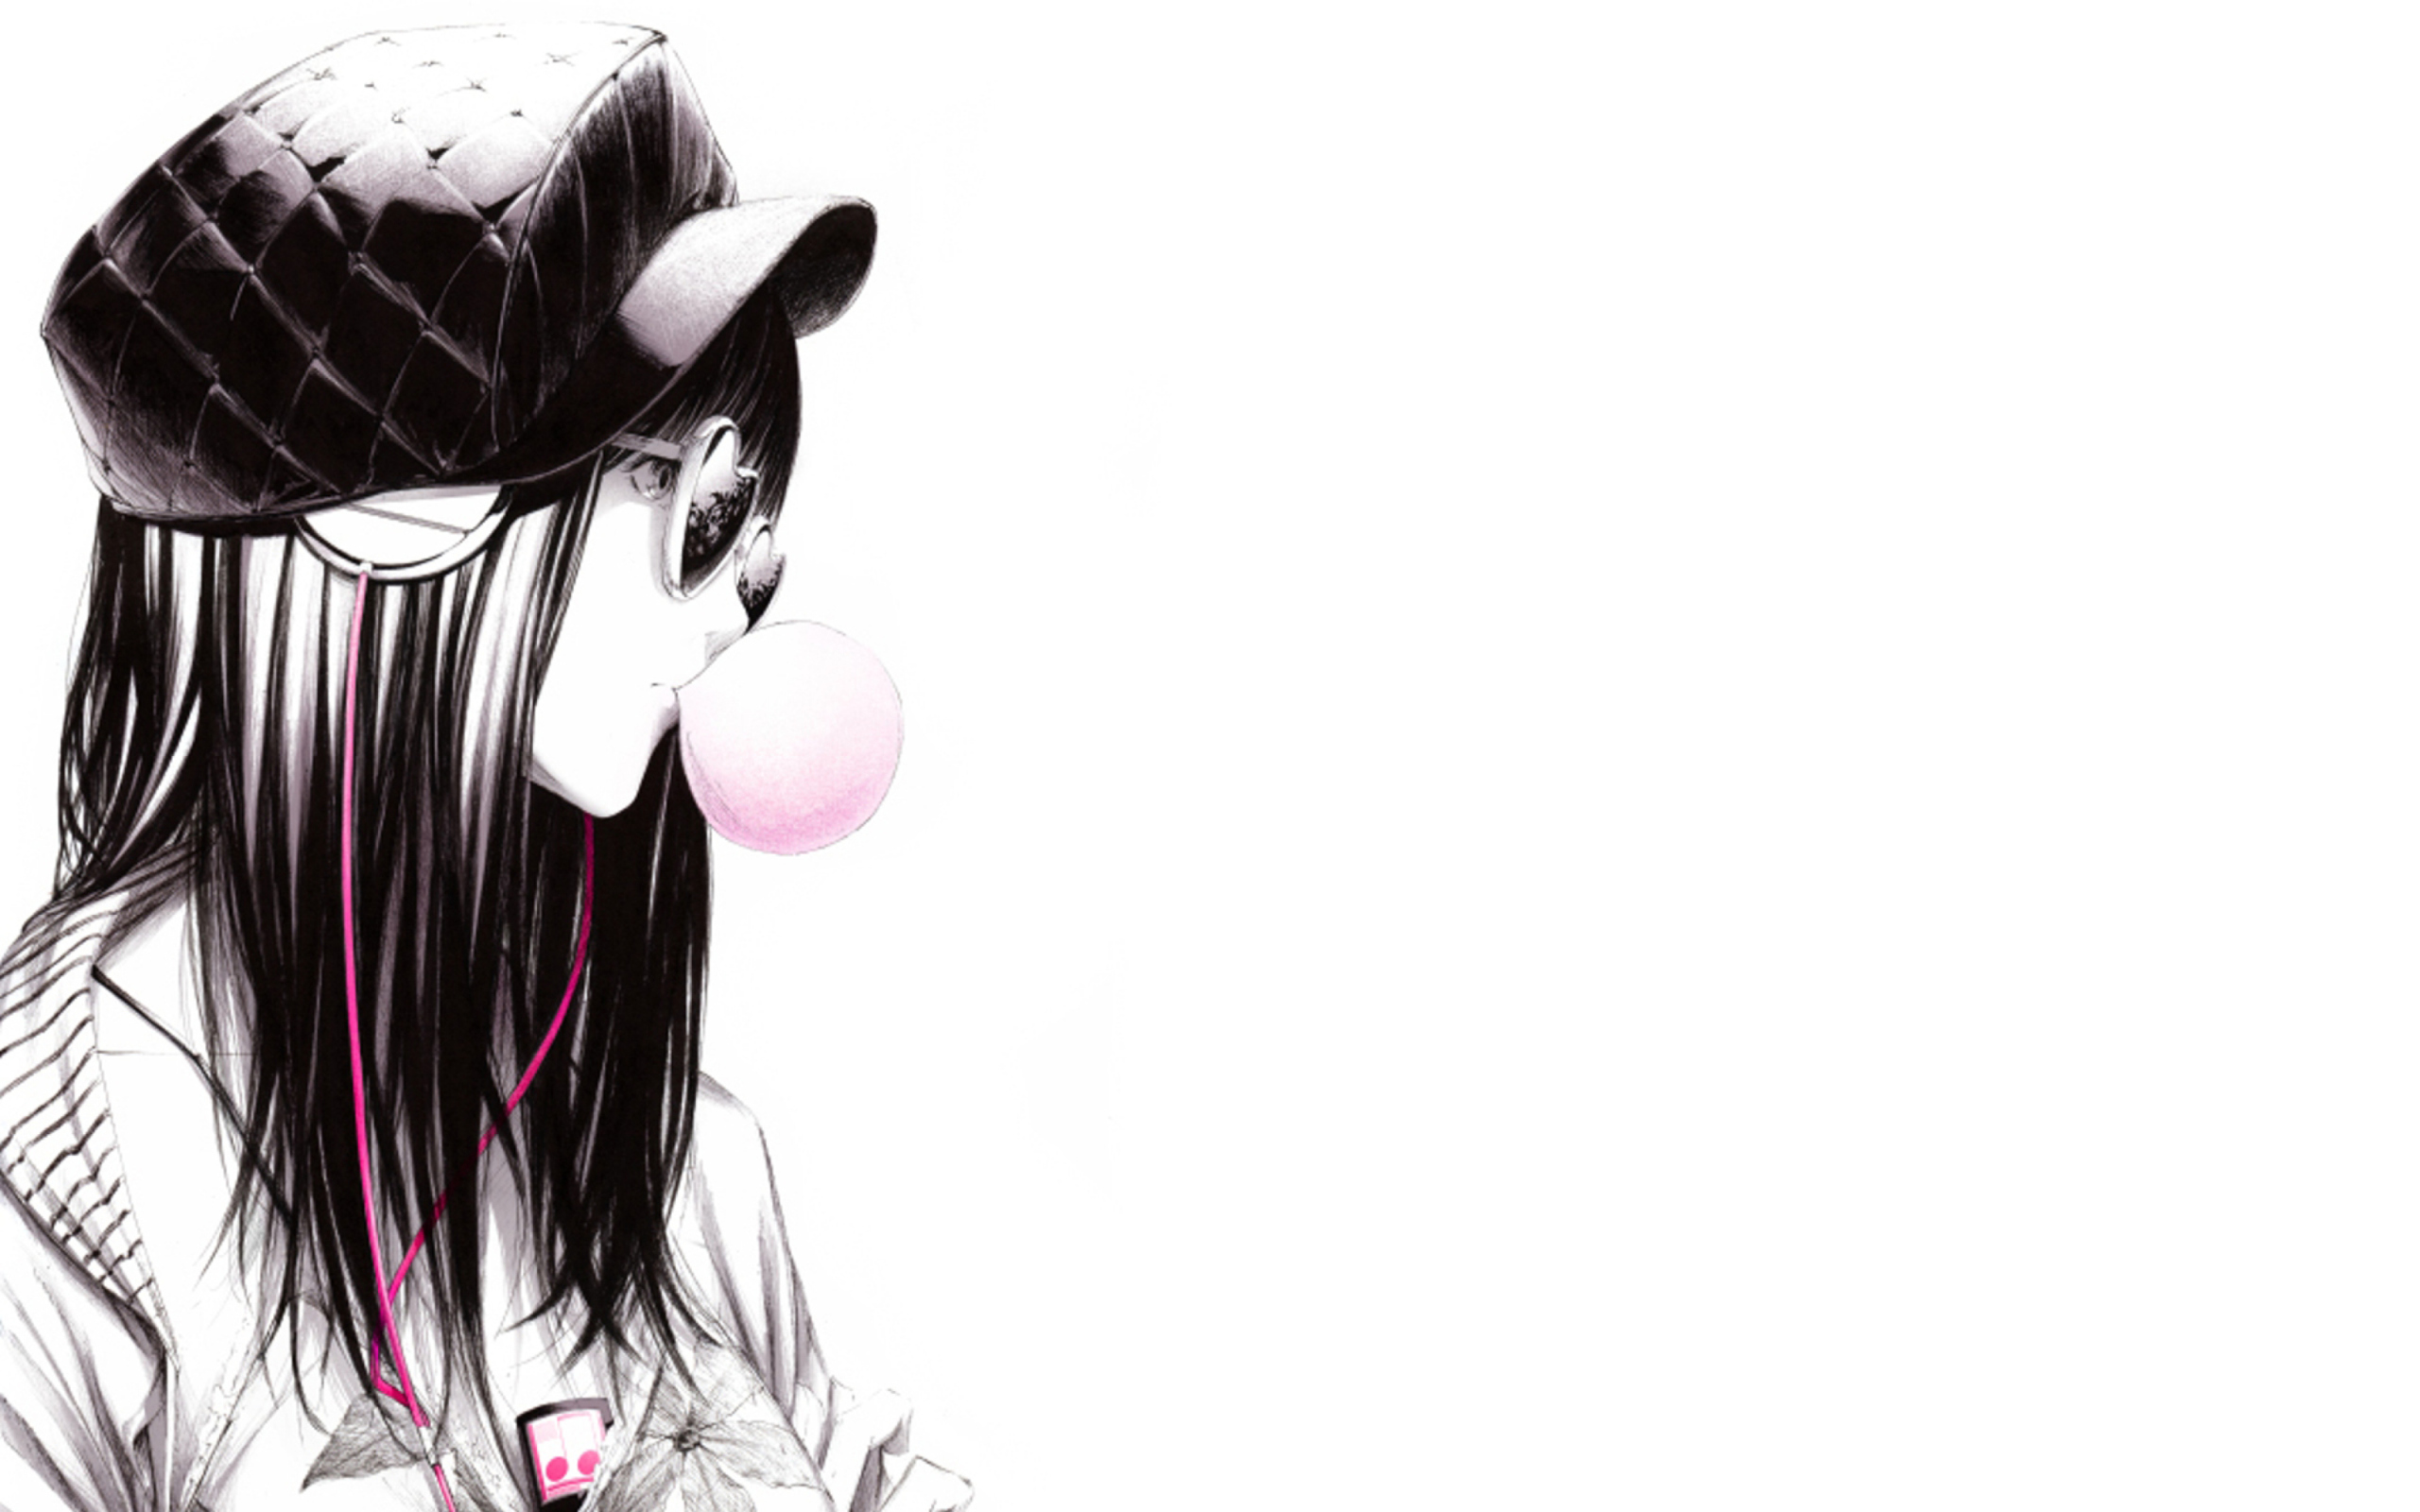 Scatch Of Girl In With Headphones And Gum screenshot #1 2560x1600